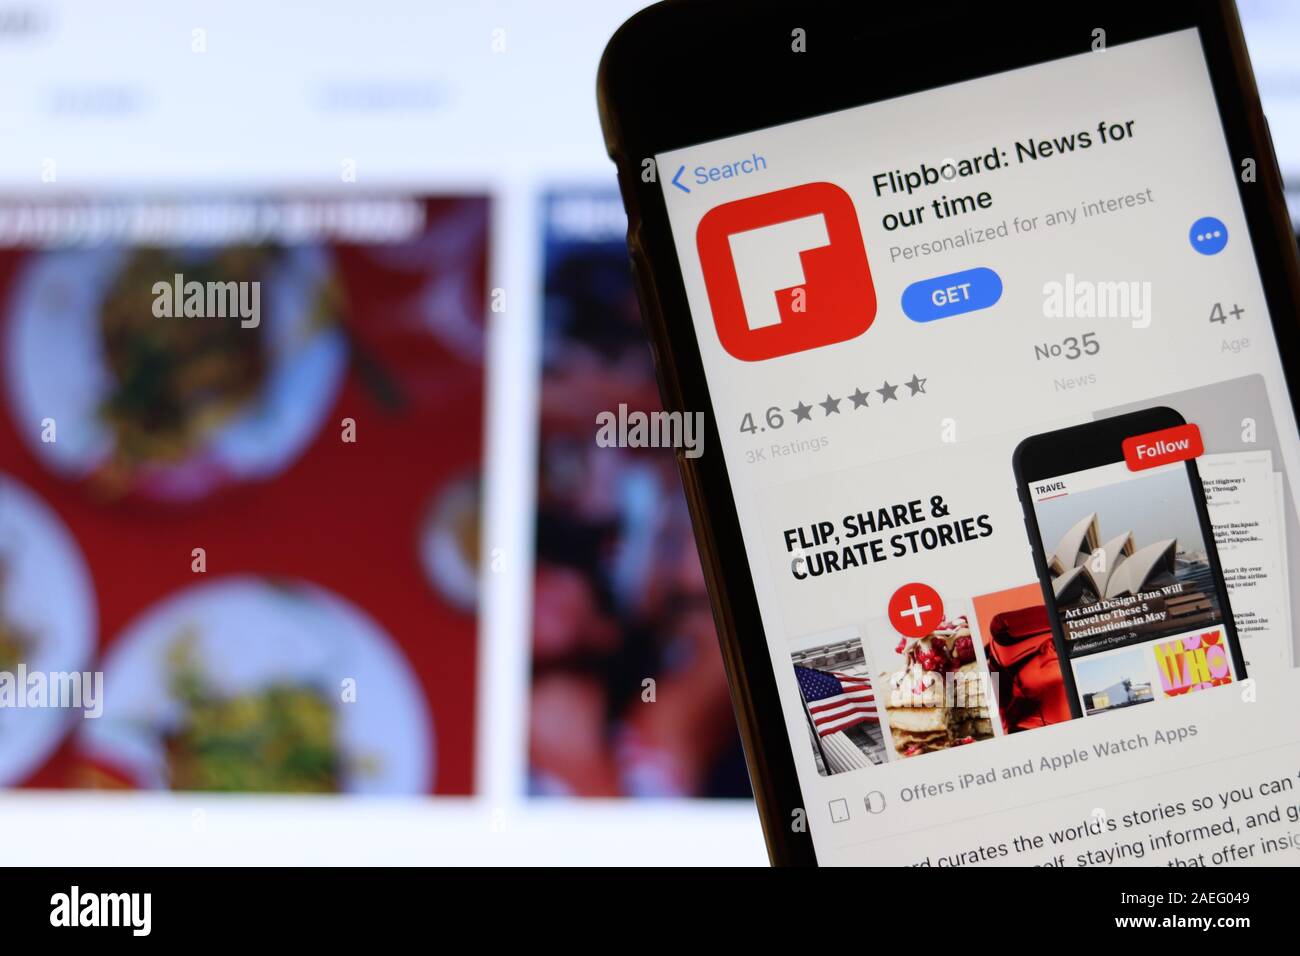 Los Angeles, California, USA - 21 November 2019: Flipboard logo on phone screen with icon on laptop on blurry background, Illustrative Editorial. Stock Photo